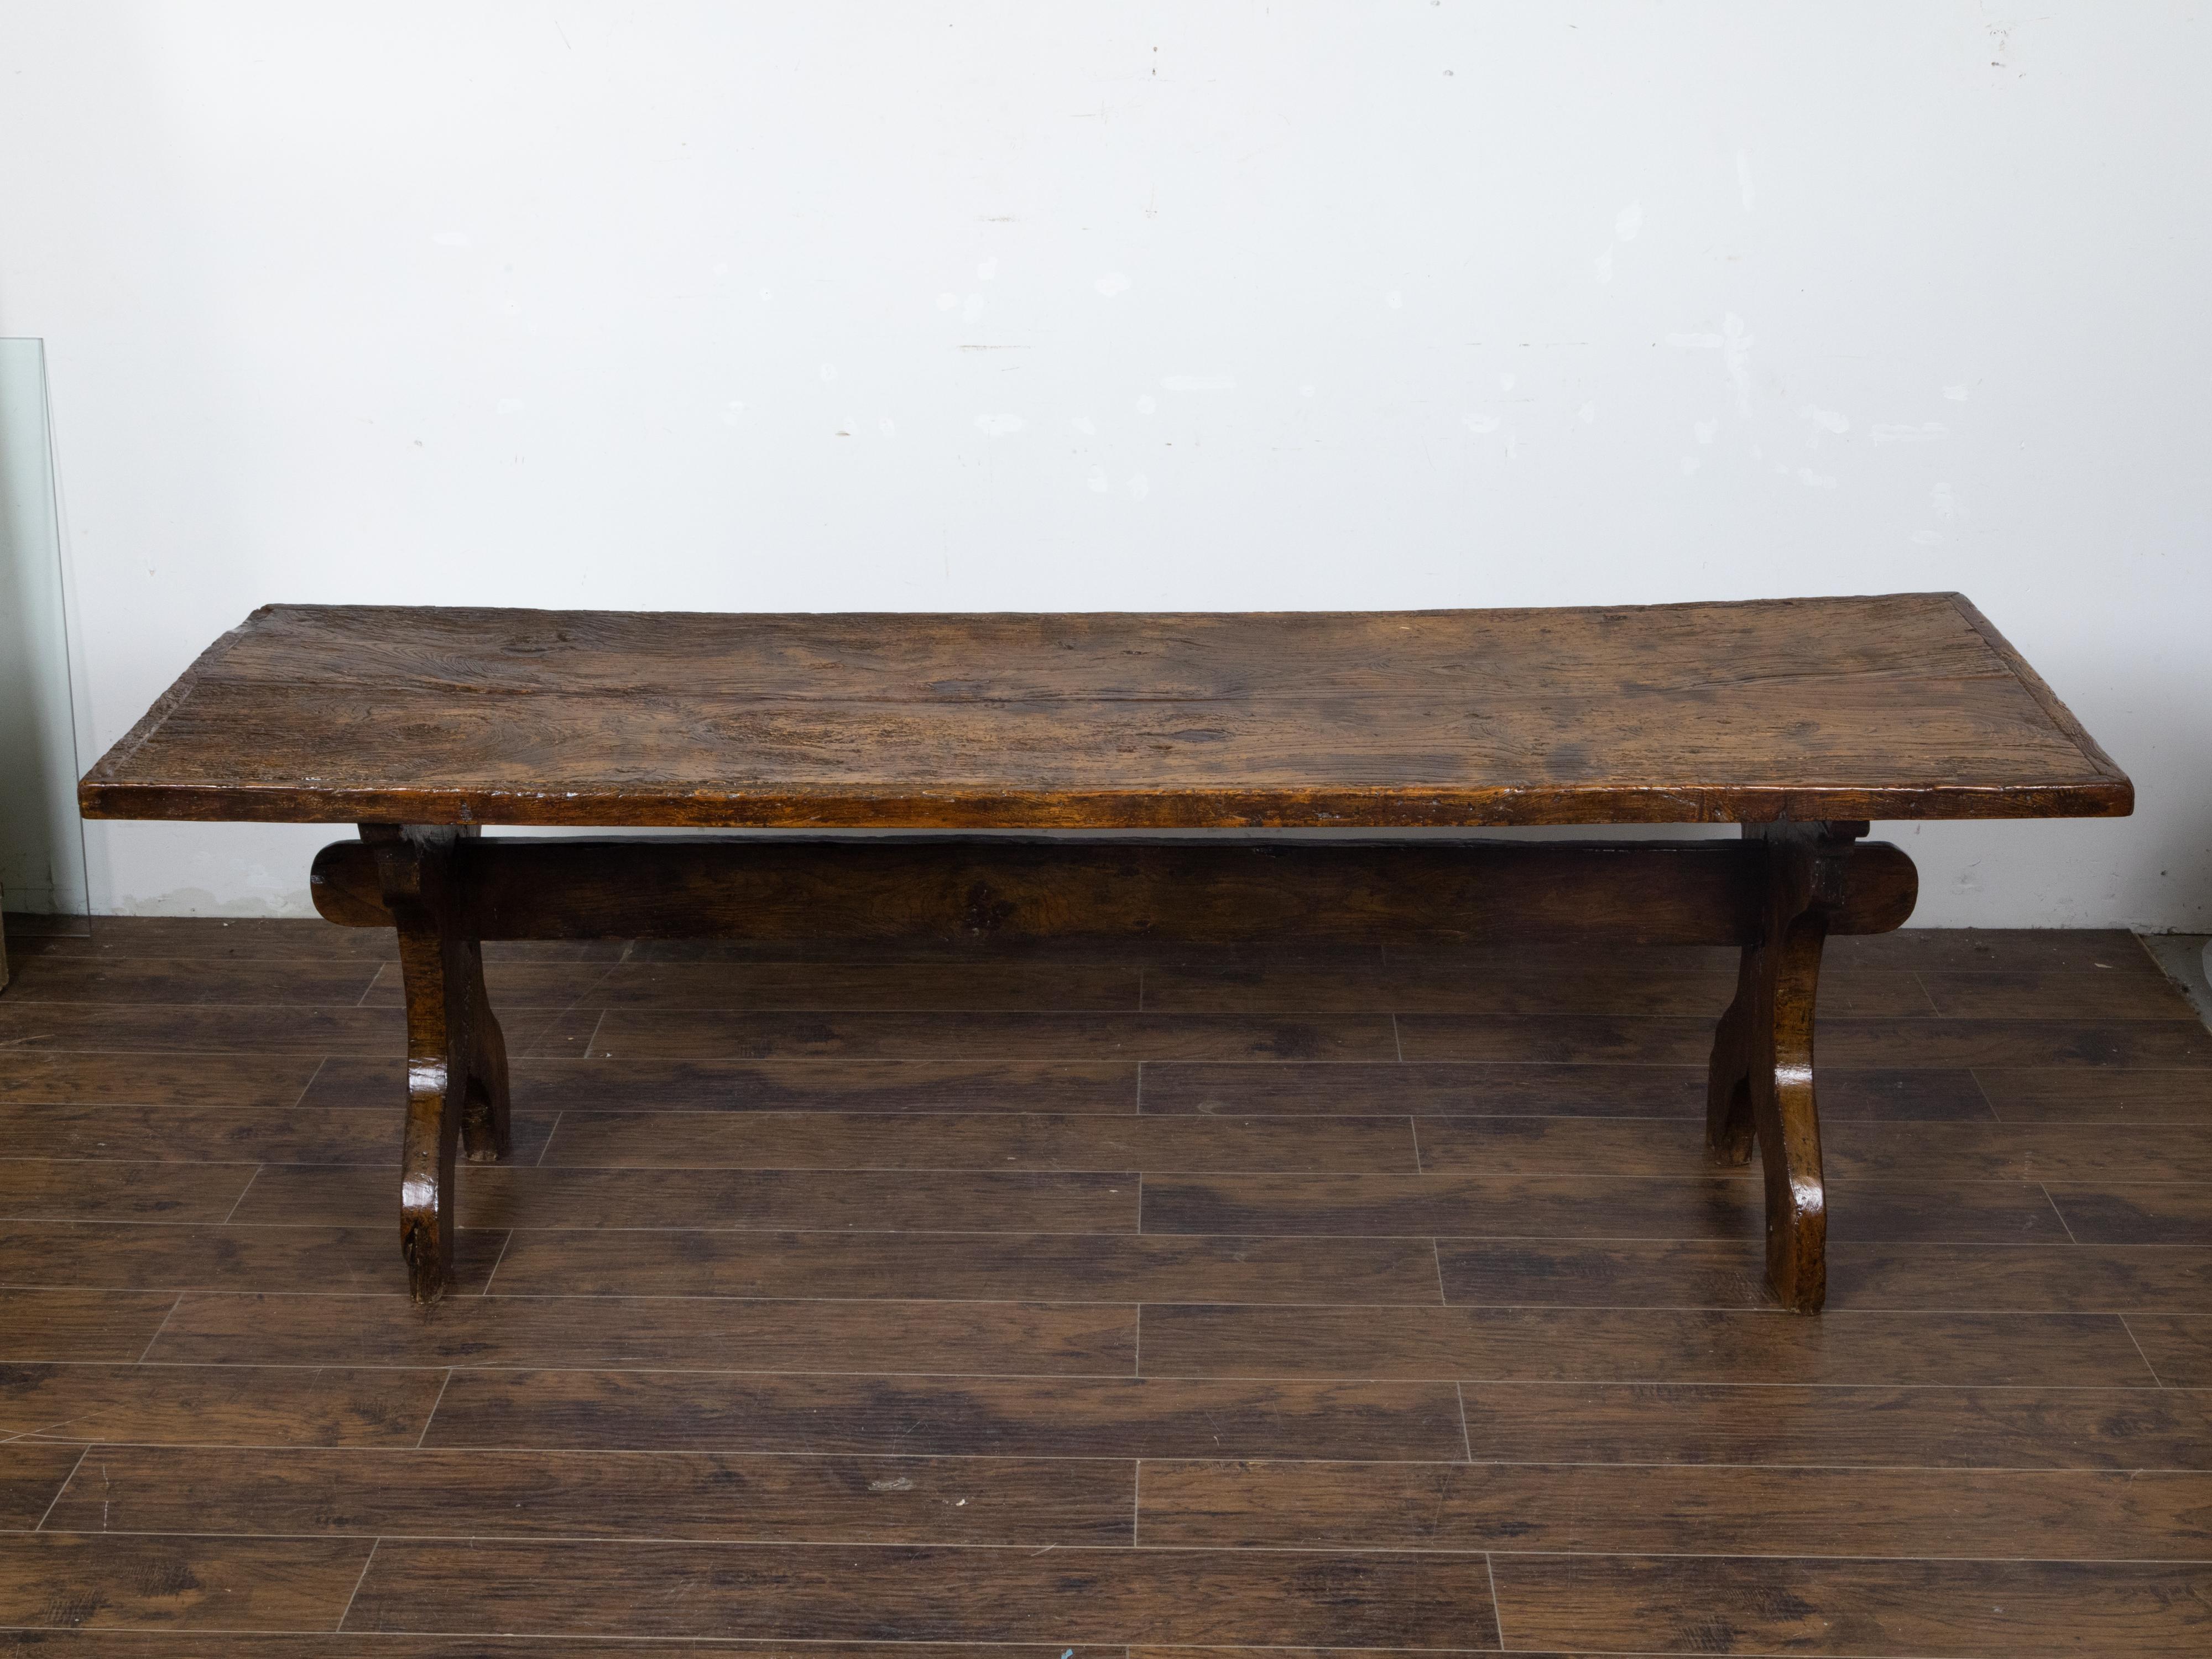 Italian 1800s Walnut Farm Table with Carved Legs, Stretcher and Weathered Patina For Sale 2